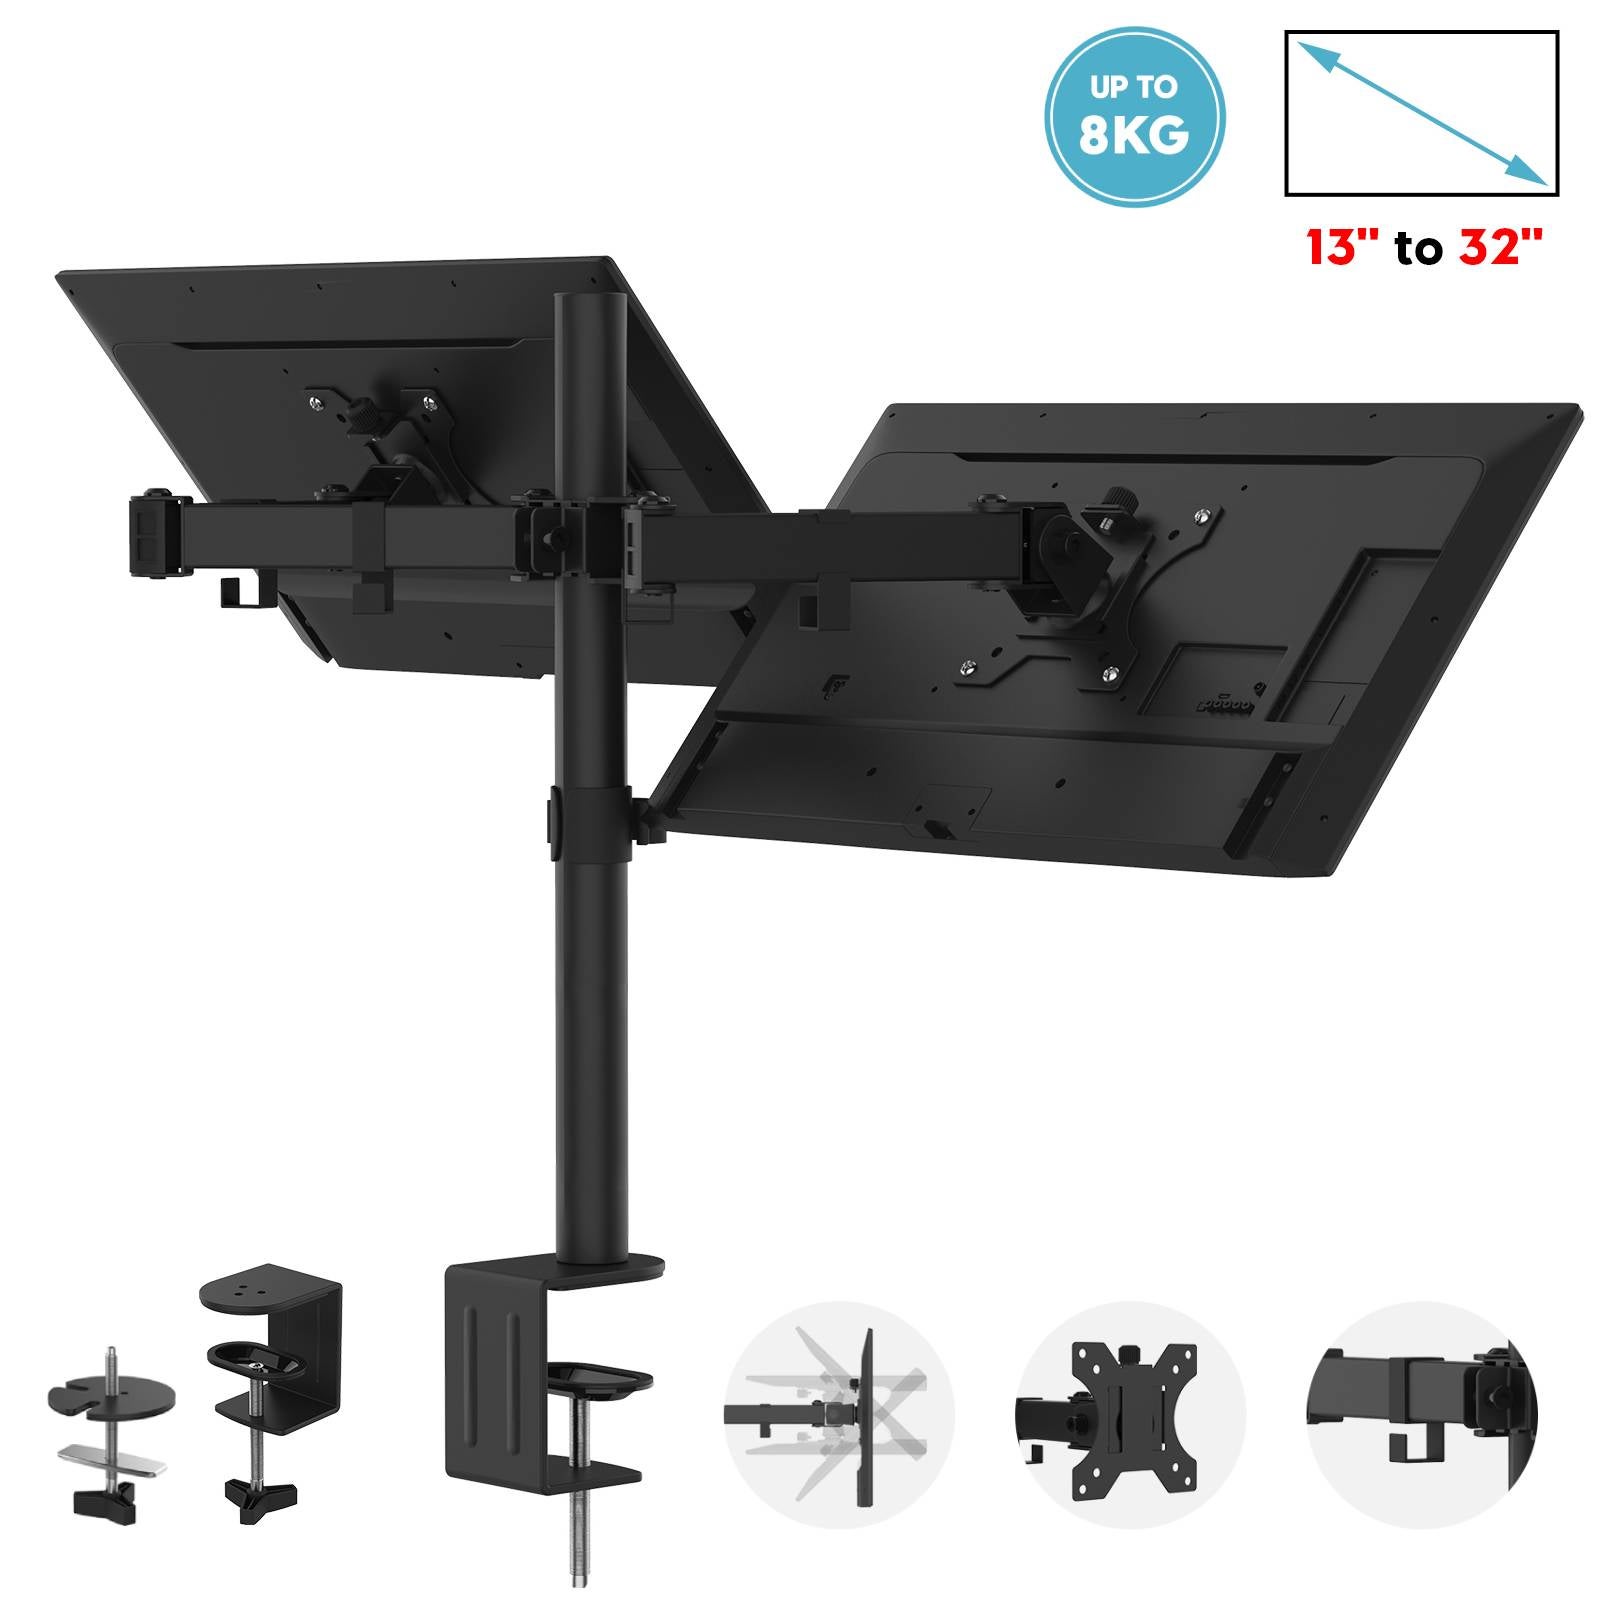 Dual Monitor Desk Mount Stand 360 Degree Rotation Height Adjustable Fits 2 Screens 10"-32"